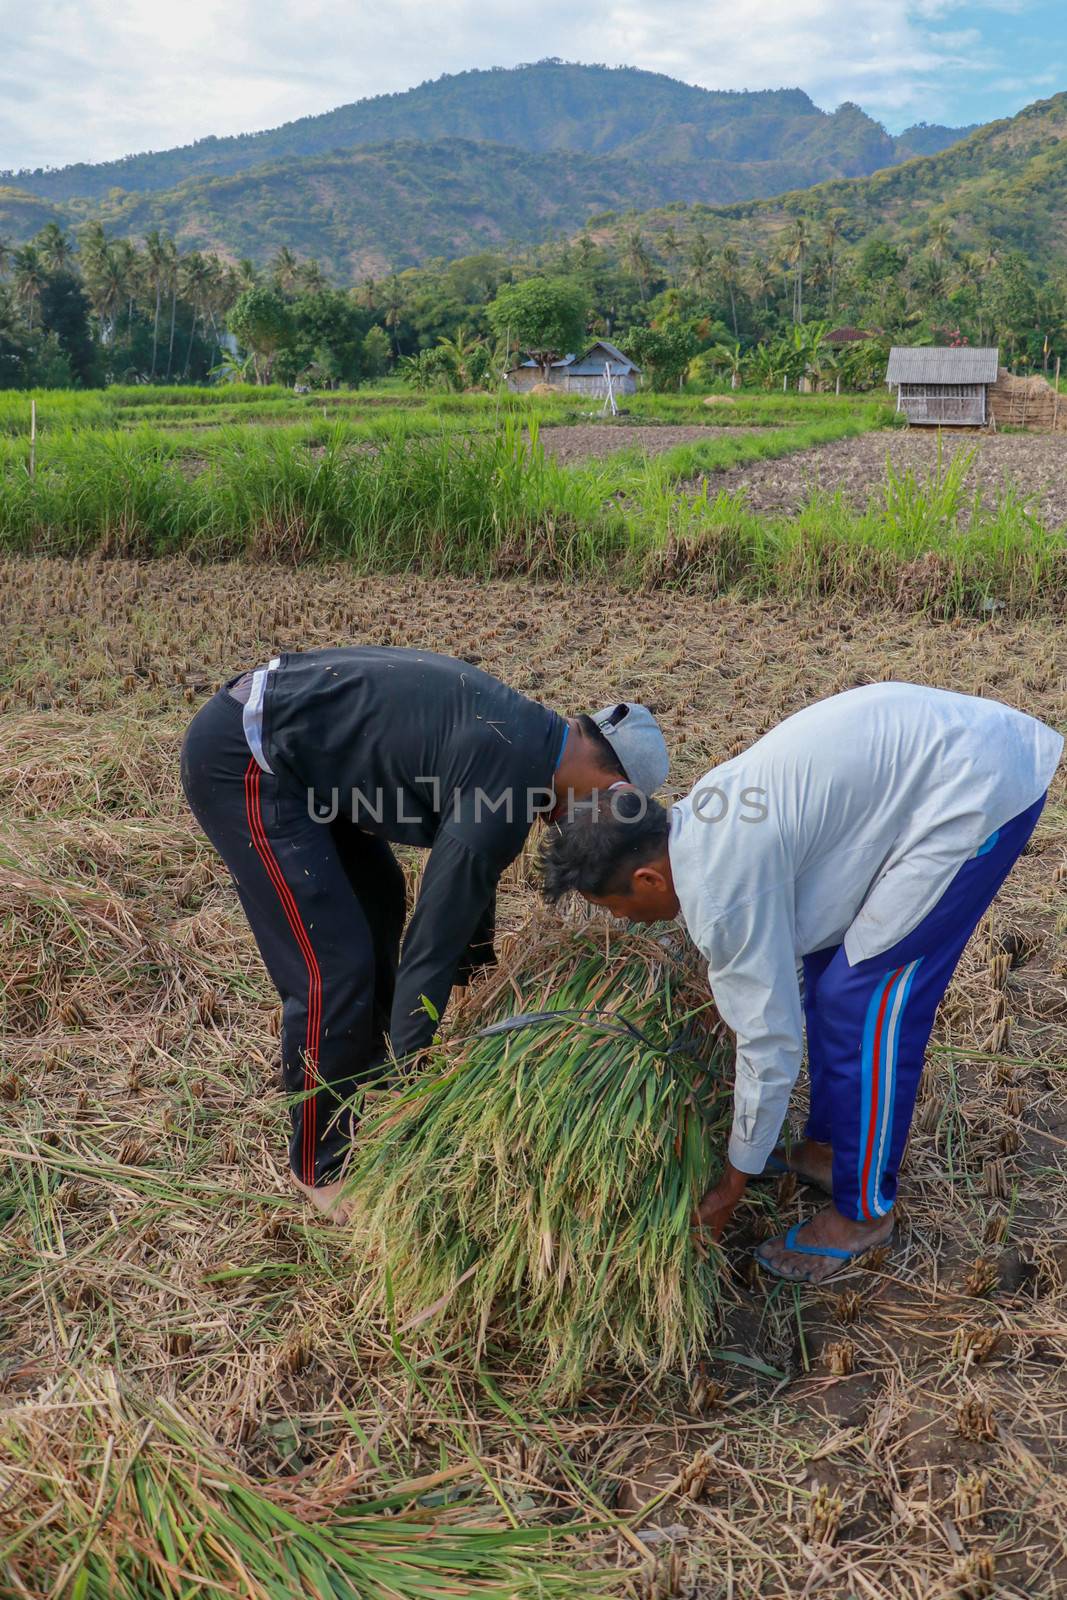 Balinese rice farmer at work harvesting ripe rice on a beautiful sunny day. Two men working in the field. A younger man helps an older one to pick up a sheaf of grass.